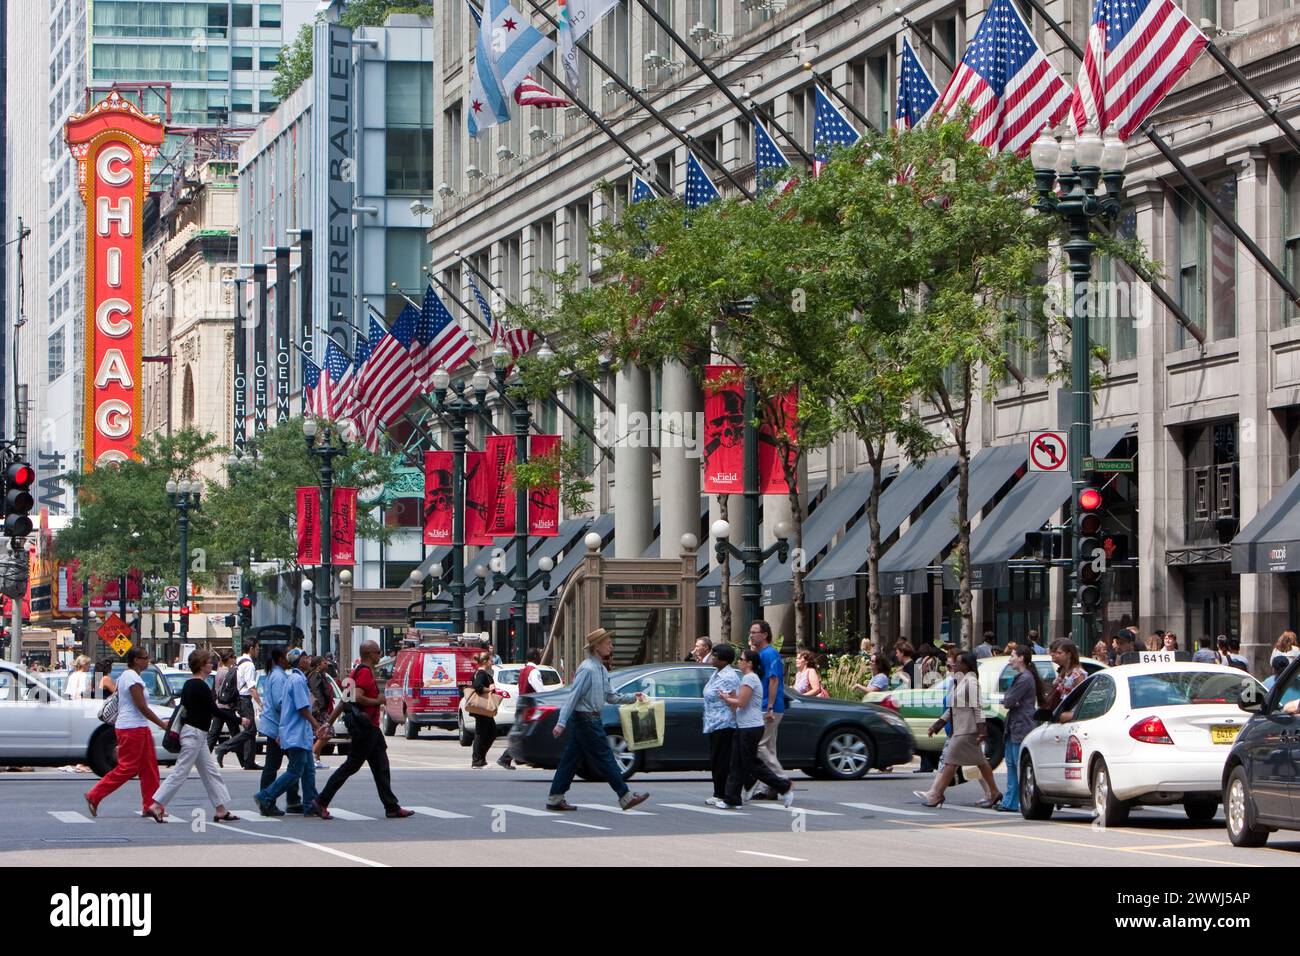 Chicago, Illinois.  State Street.  Macy's on State Street Department Store on right, formerly Marshall Field's.  Chicago Theater in Background. Stock Photo